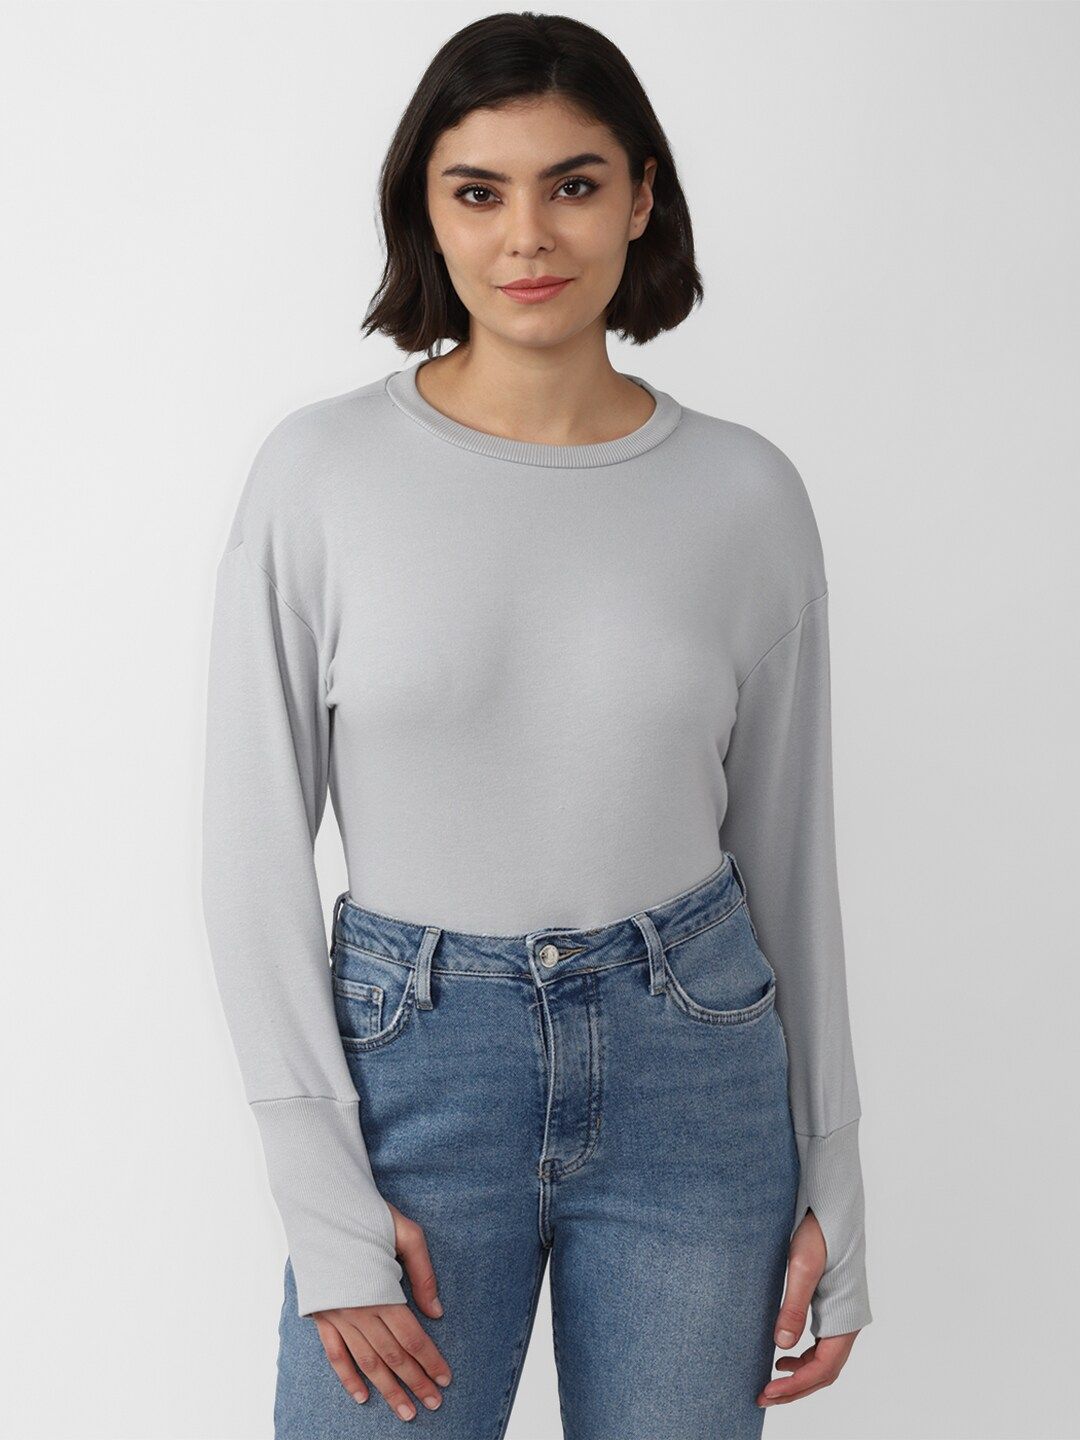 FOREVER 21 Grey Solid Regular Top Price in India